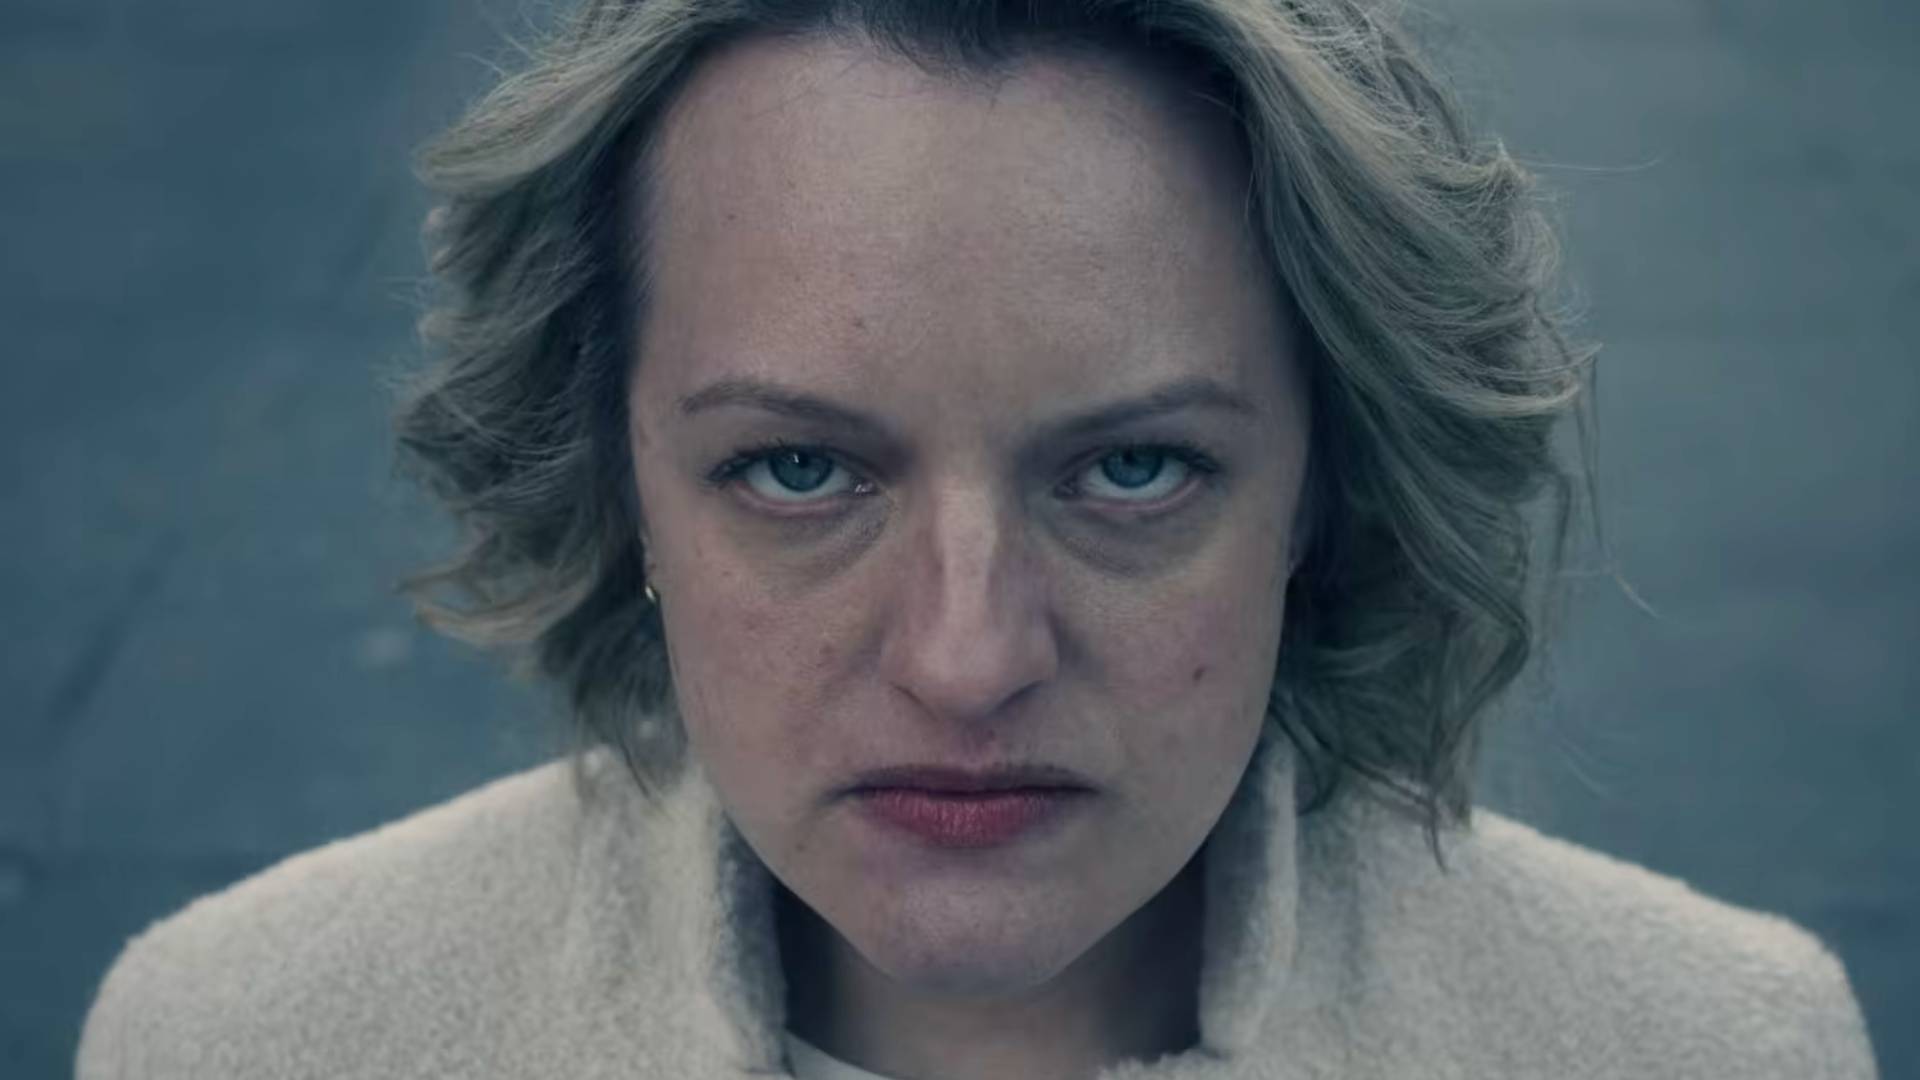 June gears up for a fight with Serena in The Handmaid's Tale season 5